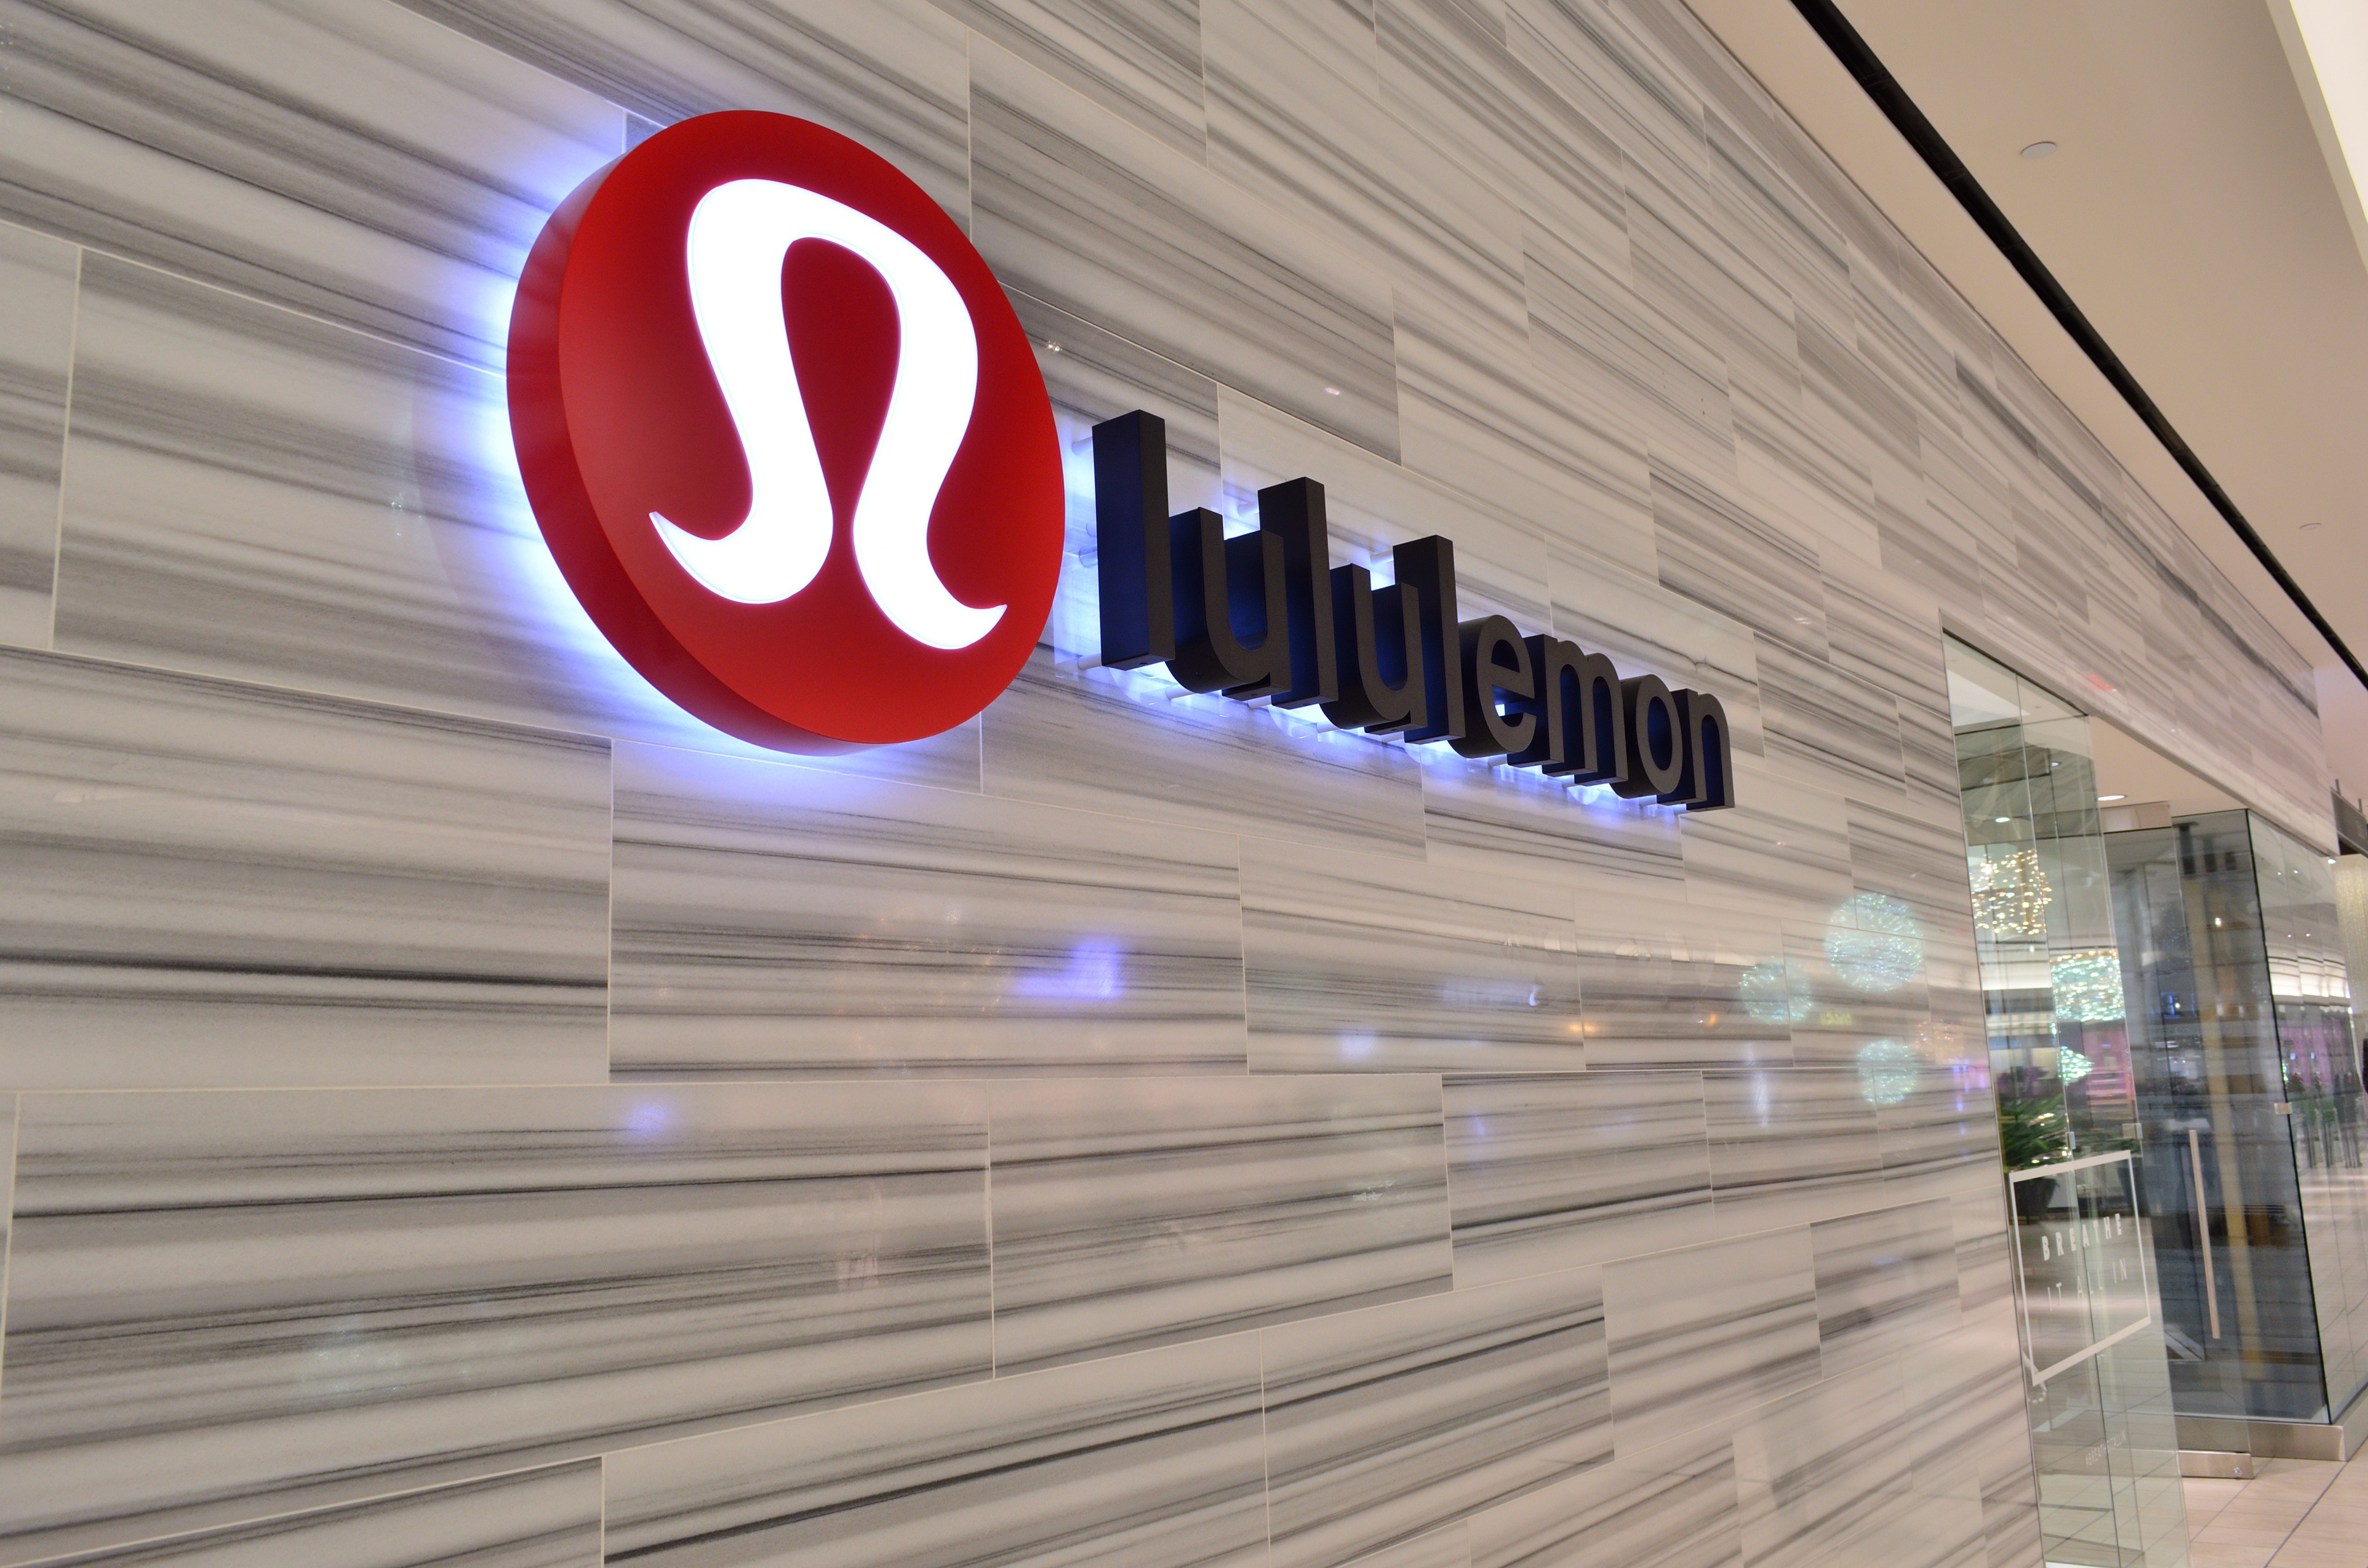 7 Lululemon Analysts On The Q2 Print: 'We See The Pullback As An Opportunity'